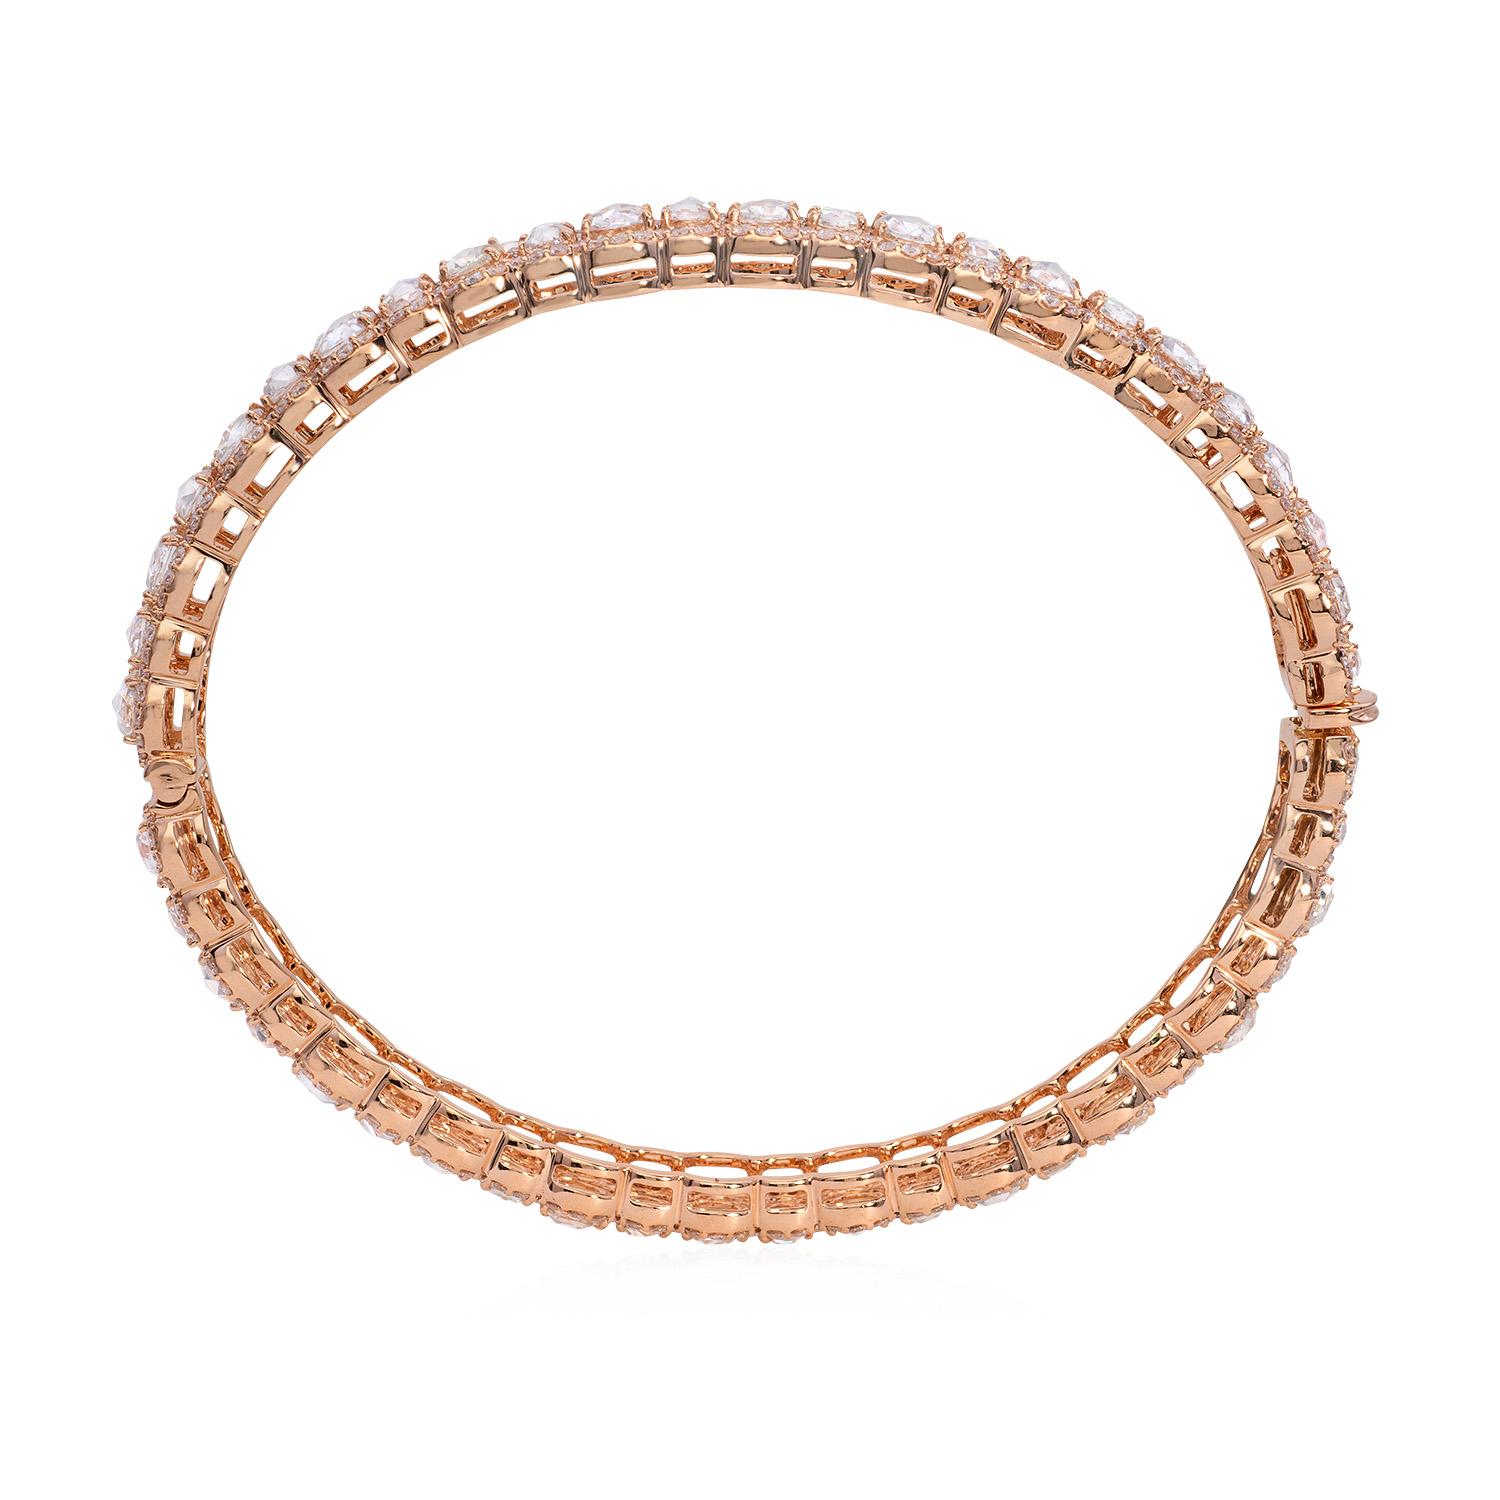 The tennis bracelet is a classic and timeless piece of jewelry that exudes elegance and sophistication. This particular bracelet is crafted from 18k rose gold, a lustrous and durable precious metal known for its rich hue.

The bracelet is adorned